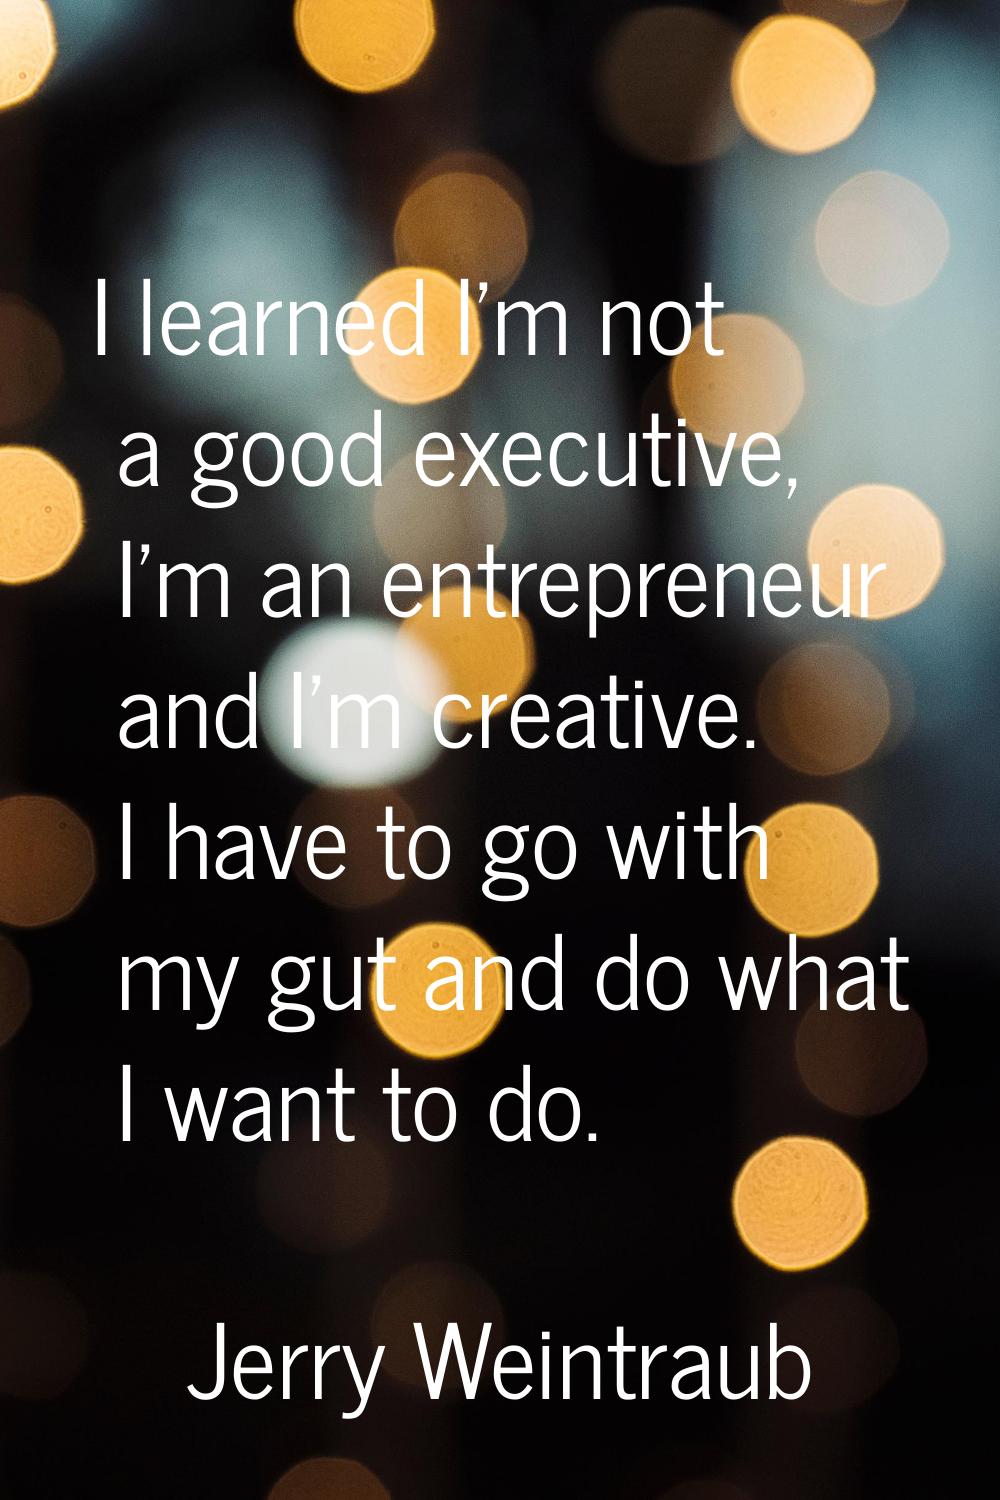 I learned I'm not a good executive, I'm an entrepreneur and I'm creative. I have to go with my gut 